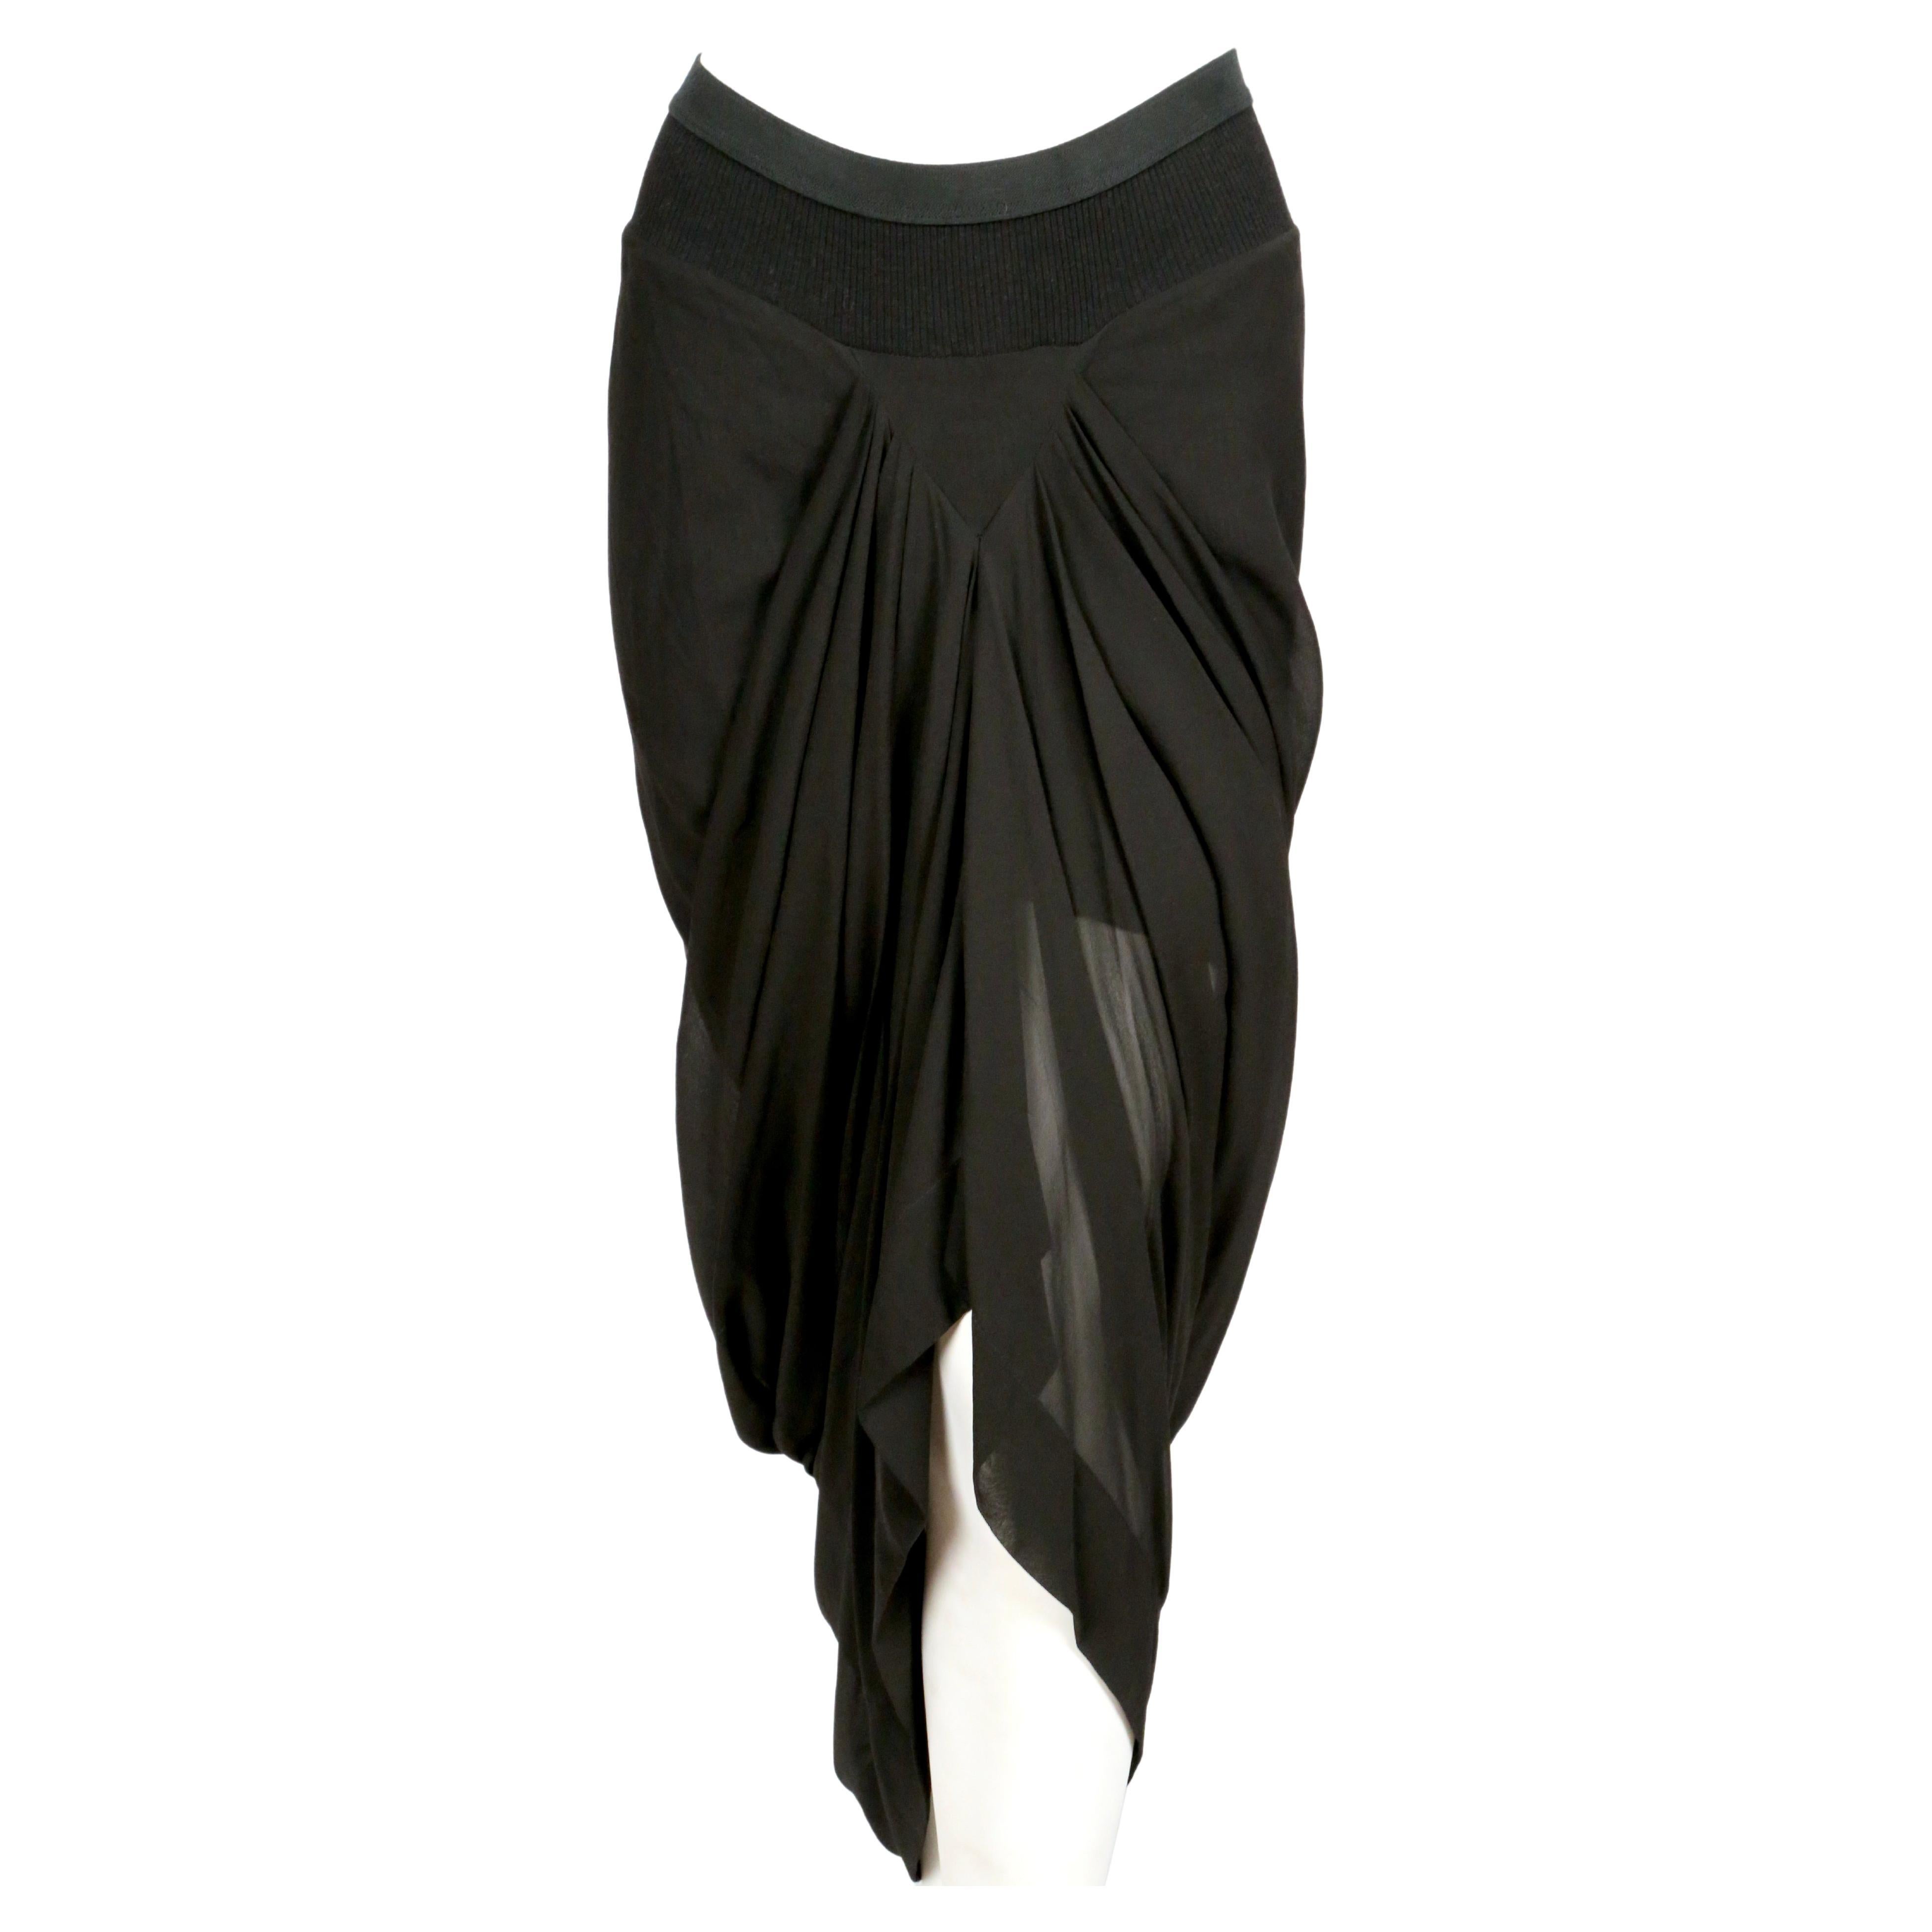 Jet-black, draped silk skirt designed by Rick Owens as seen on the 2007 'wishbone' runway collection. Skirt has a v-shape on the front, draped mermaid-style back and an elasticized waist . Italian size 42 although it fits several sizes due to the